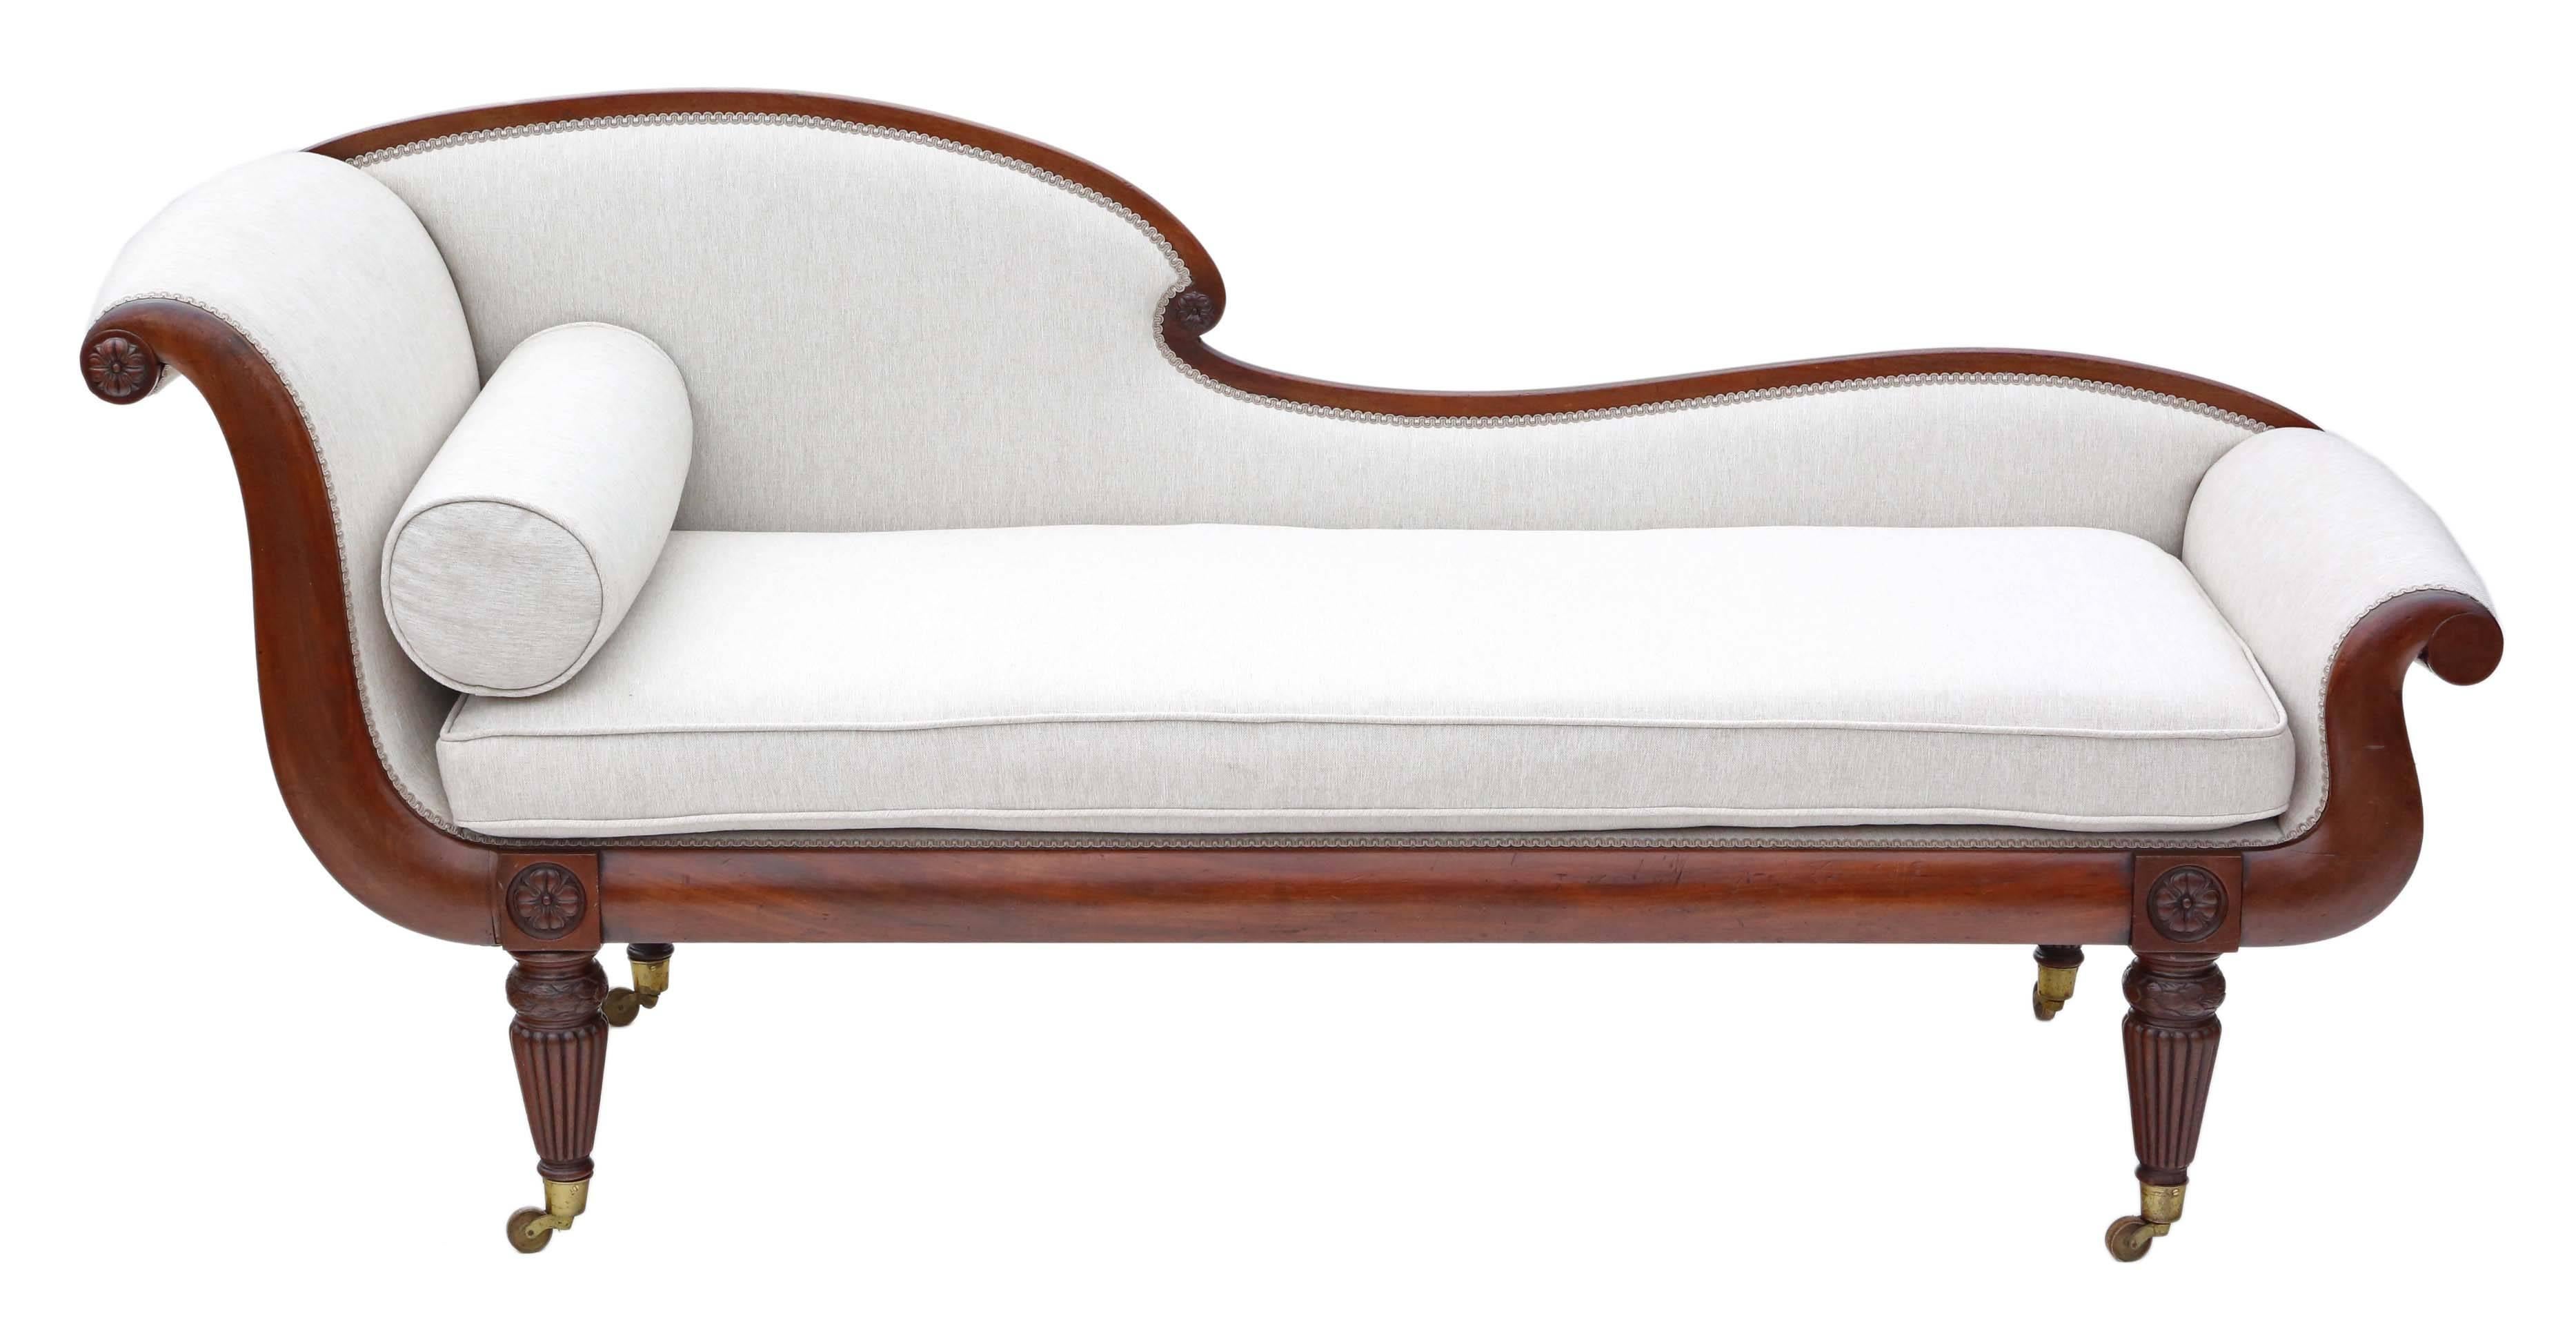 Antique Quality Regency circa 1825 Mahogany Scroll Arm Chaise Longue Sofa In Good Condition In Wisbech, Walton Wisbech